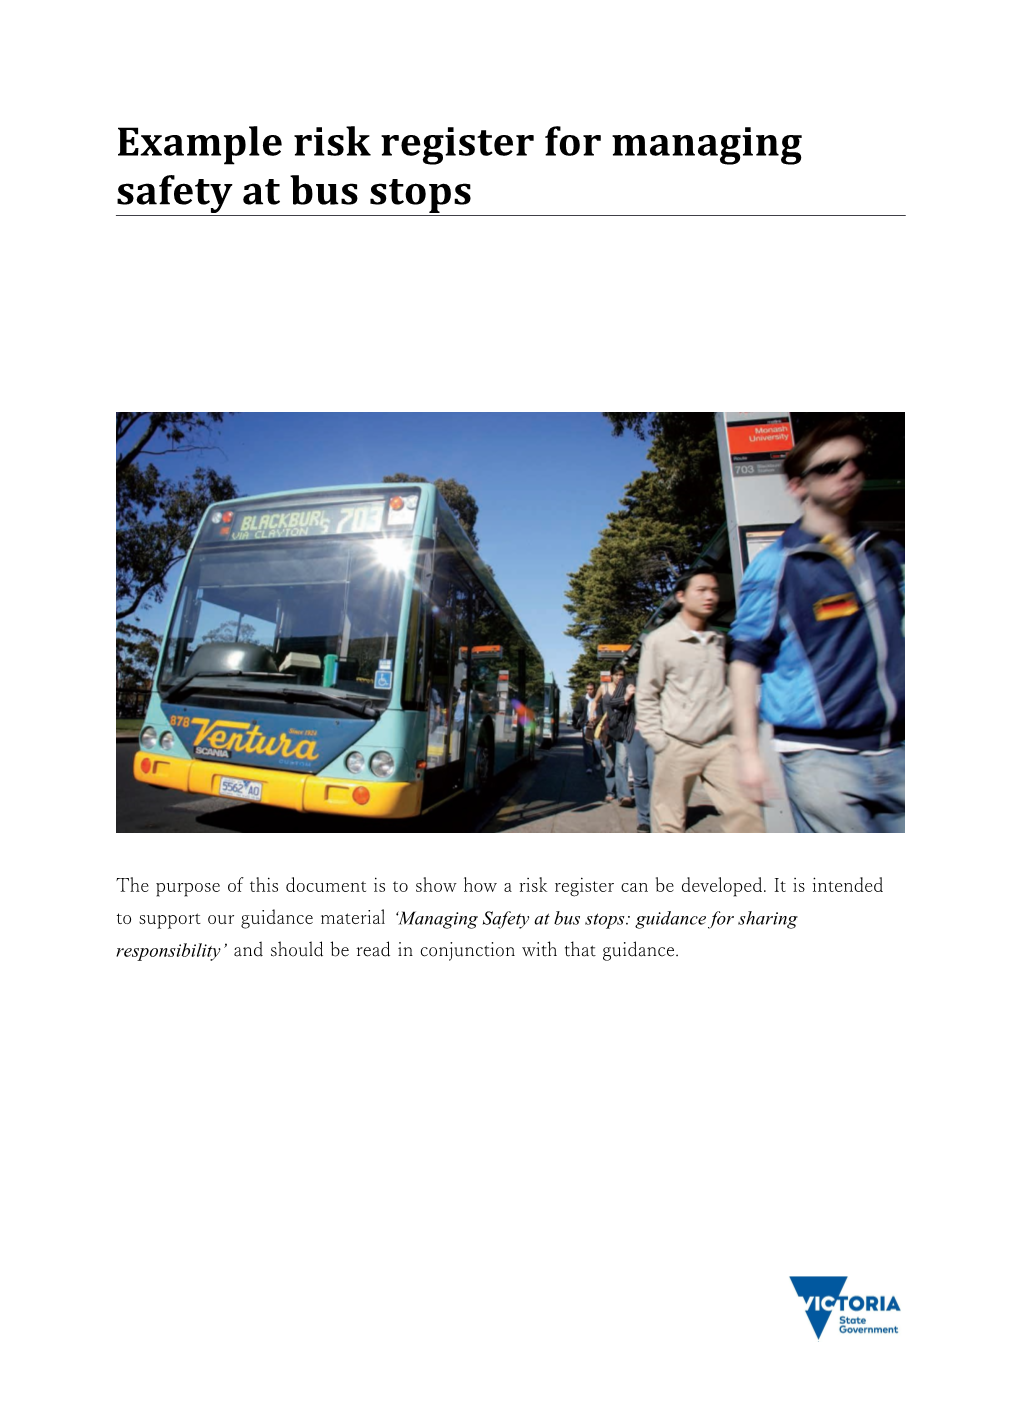 Example Risk Register for Managing Safety at Bus Stops